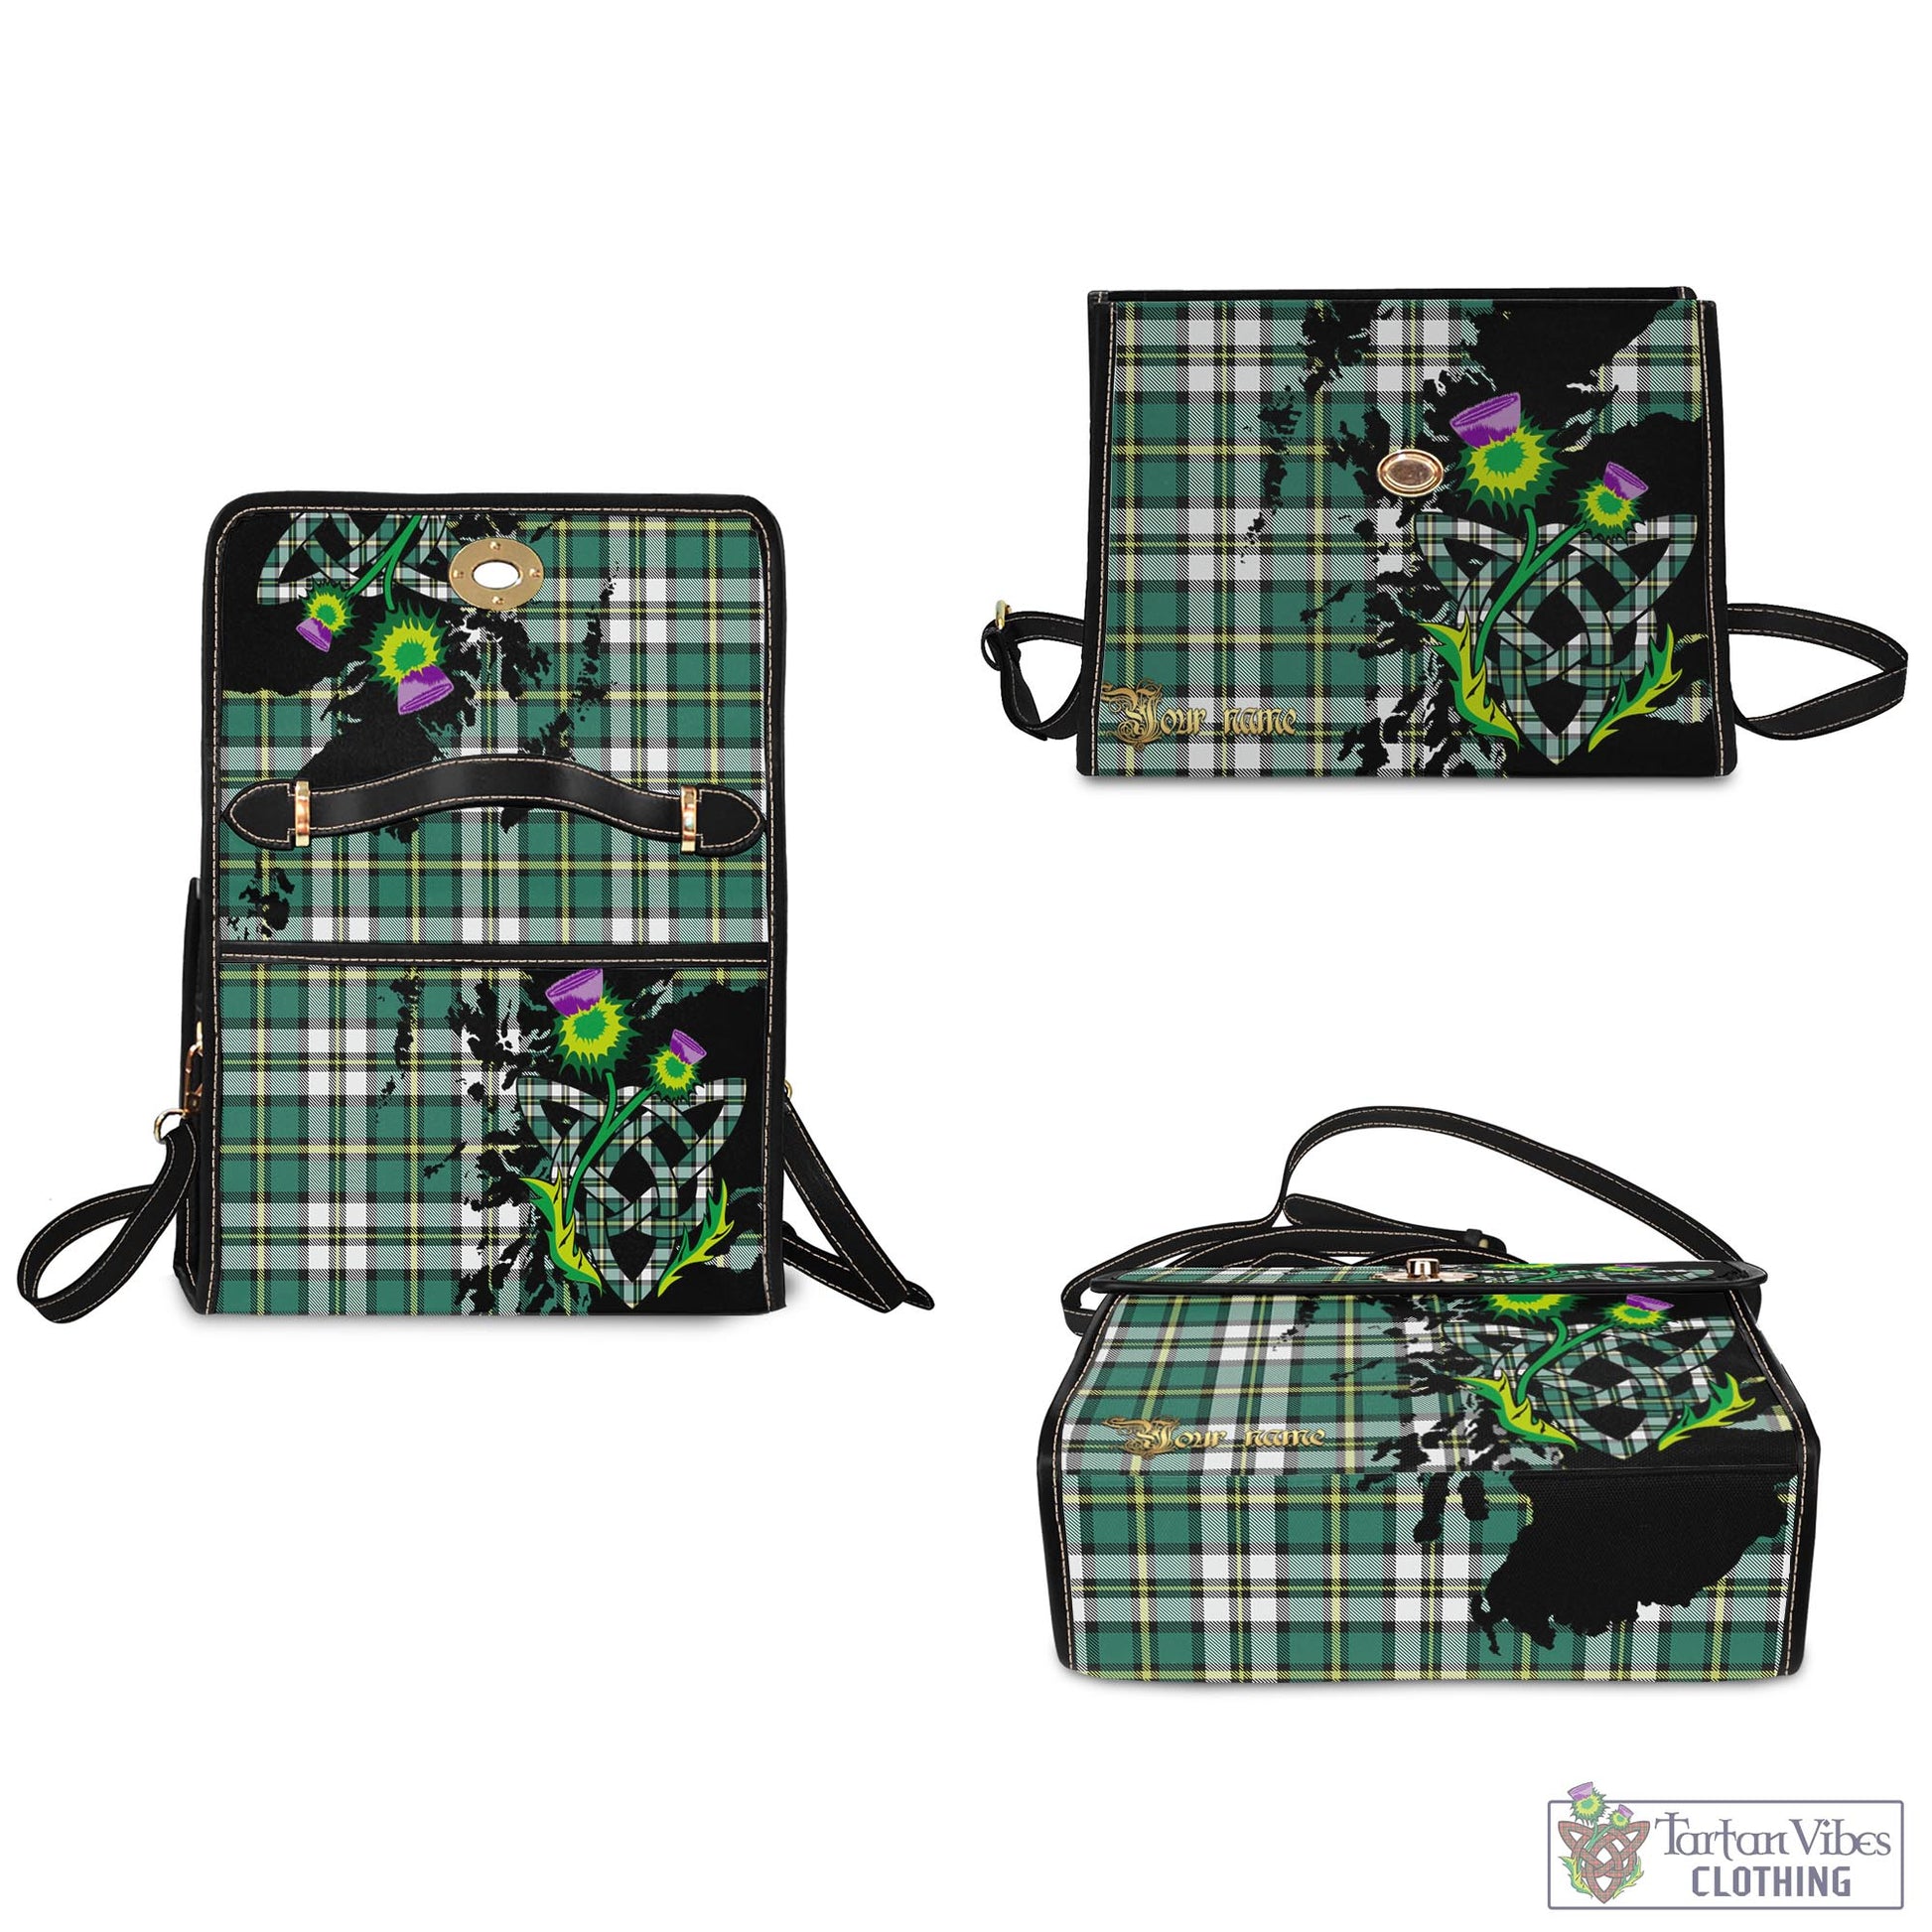 Tartan Vibes Clothing Cape Breton Island Canada Tartan Waterproof Canvas Bag with Scotland Map and Thistle Celtic Accents